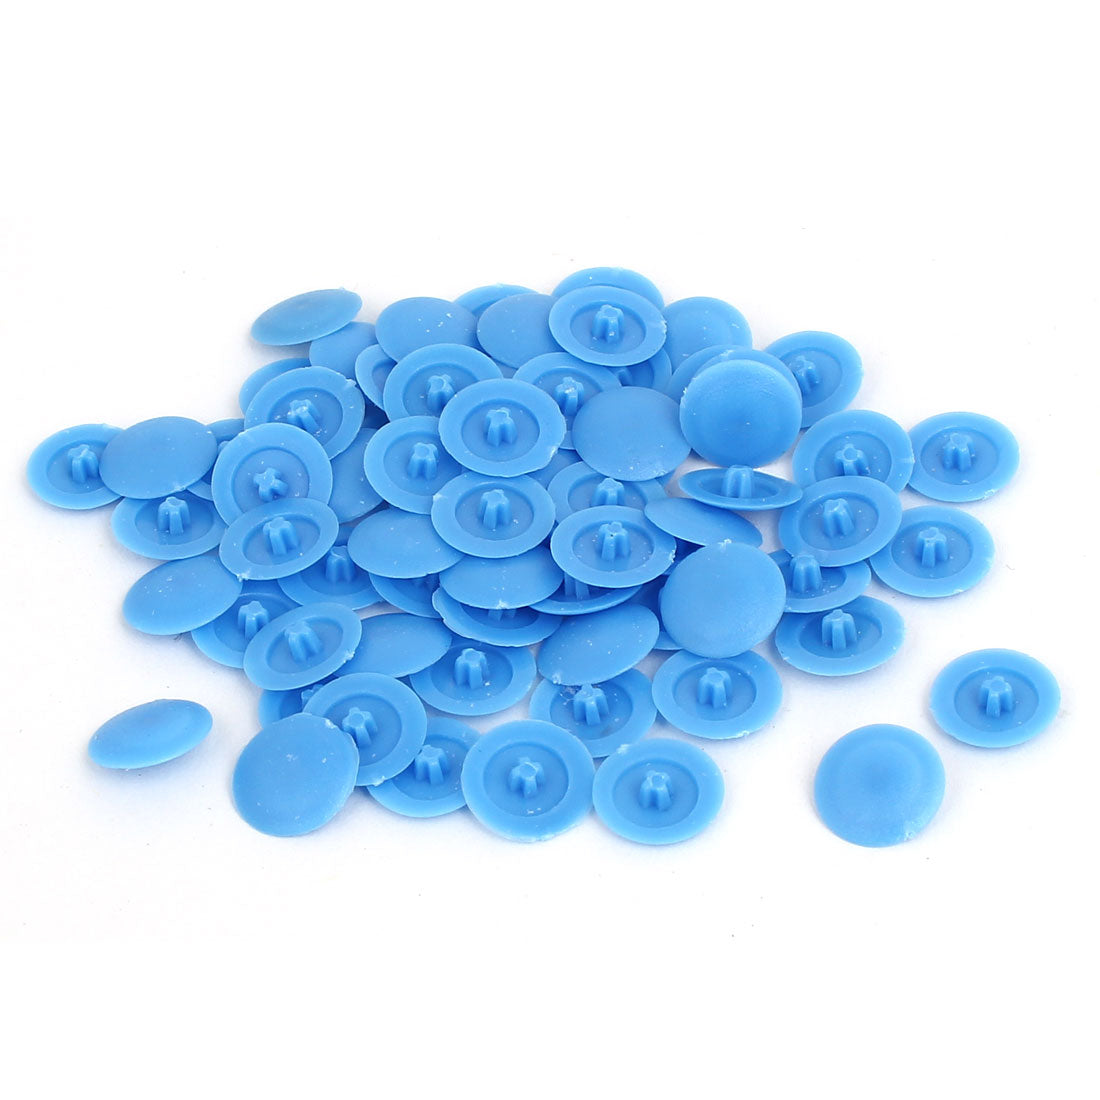 uxcell Uxcell 12mm Dia Plastic Phillips Screw Cap Hole Plugs Dust Proof Covers Blue 100pcs